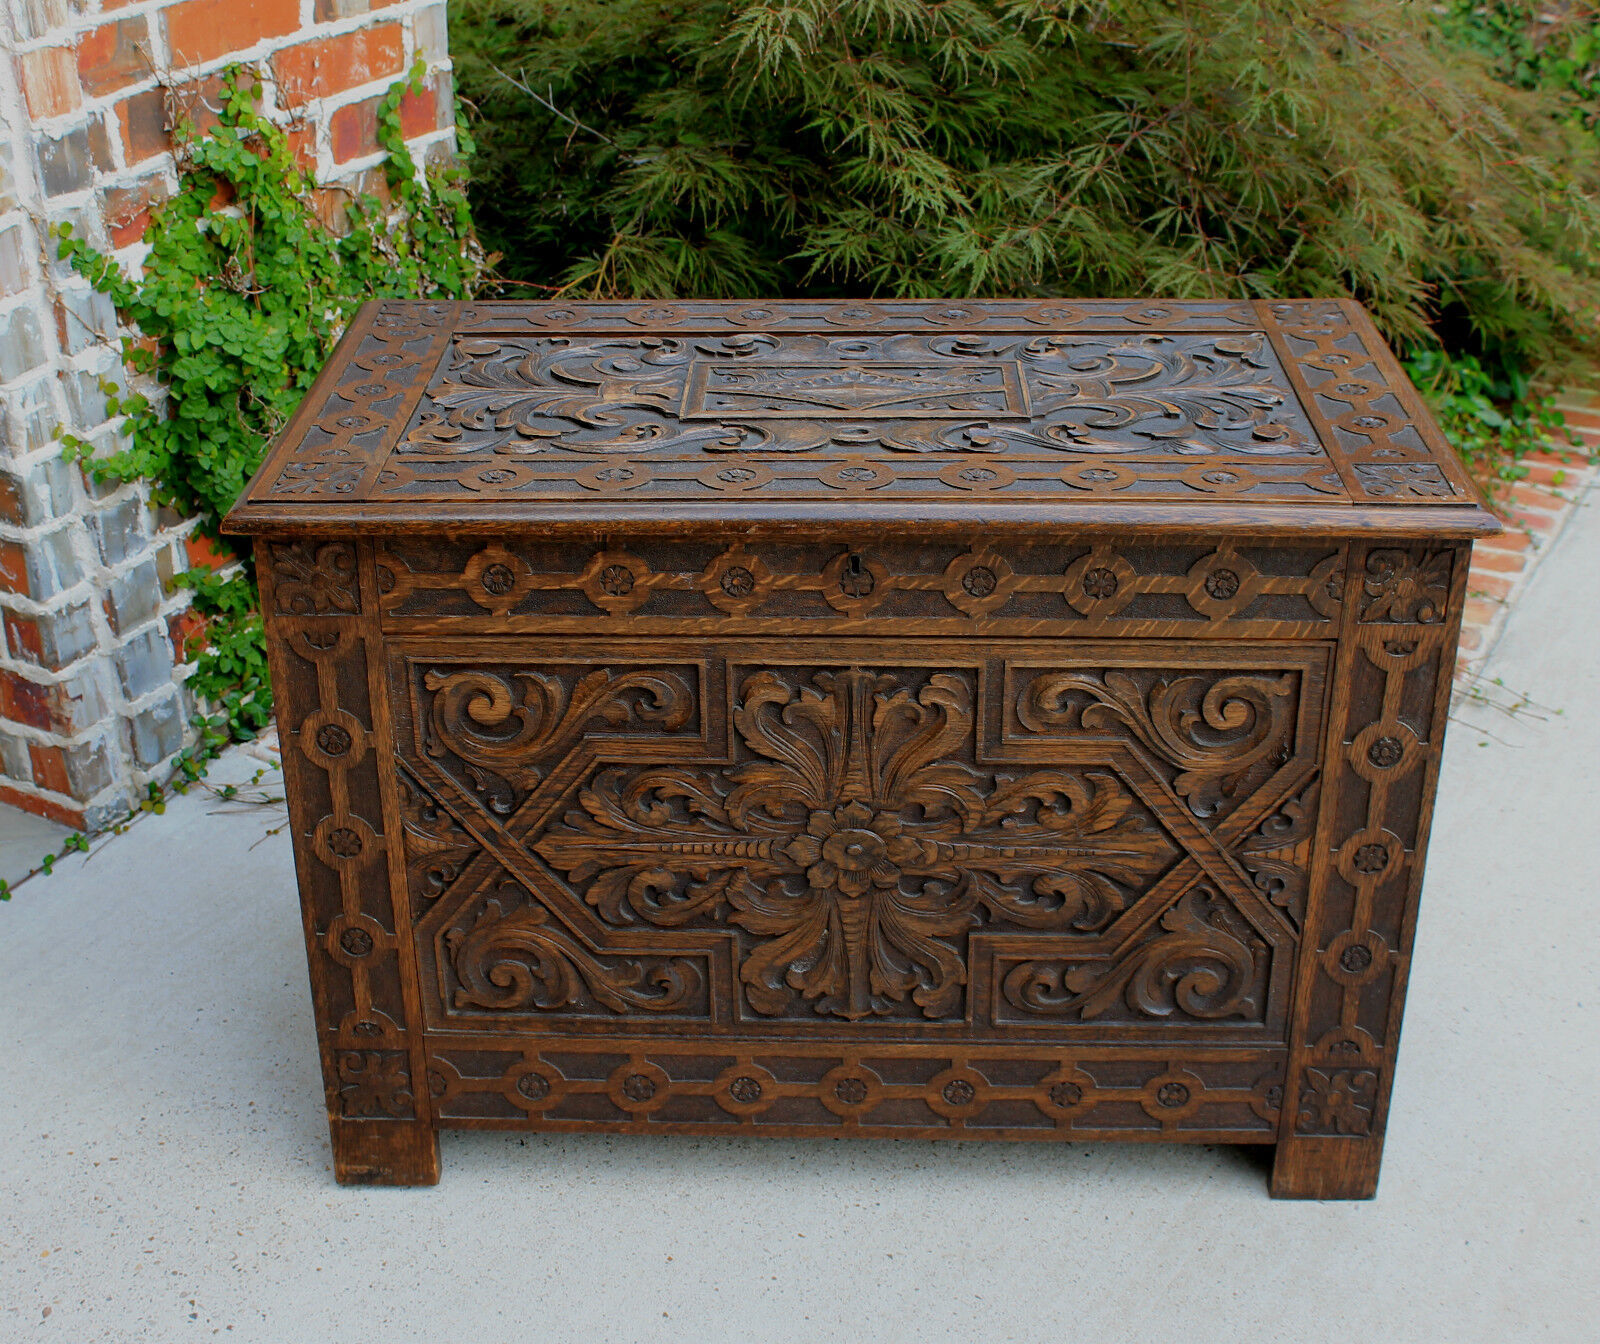 Antique BEAUTIFUL English Carved Oak Blanket Box Coffer Trunk Chest Coffee Table